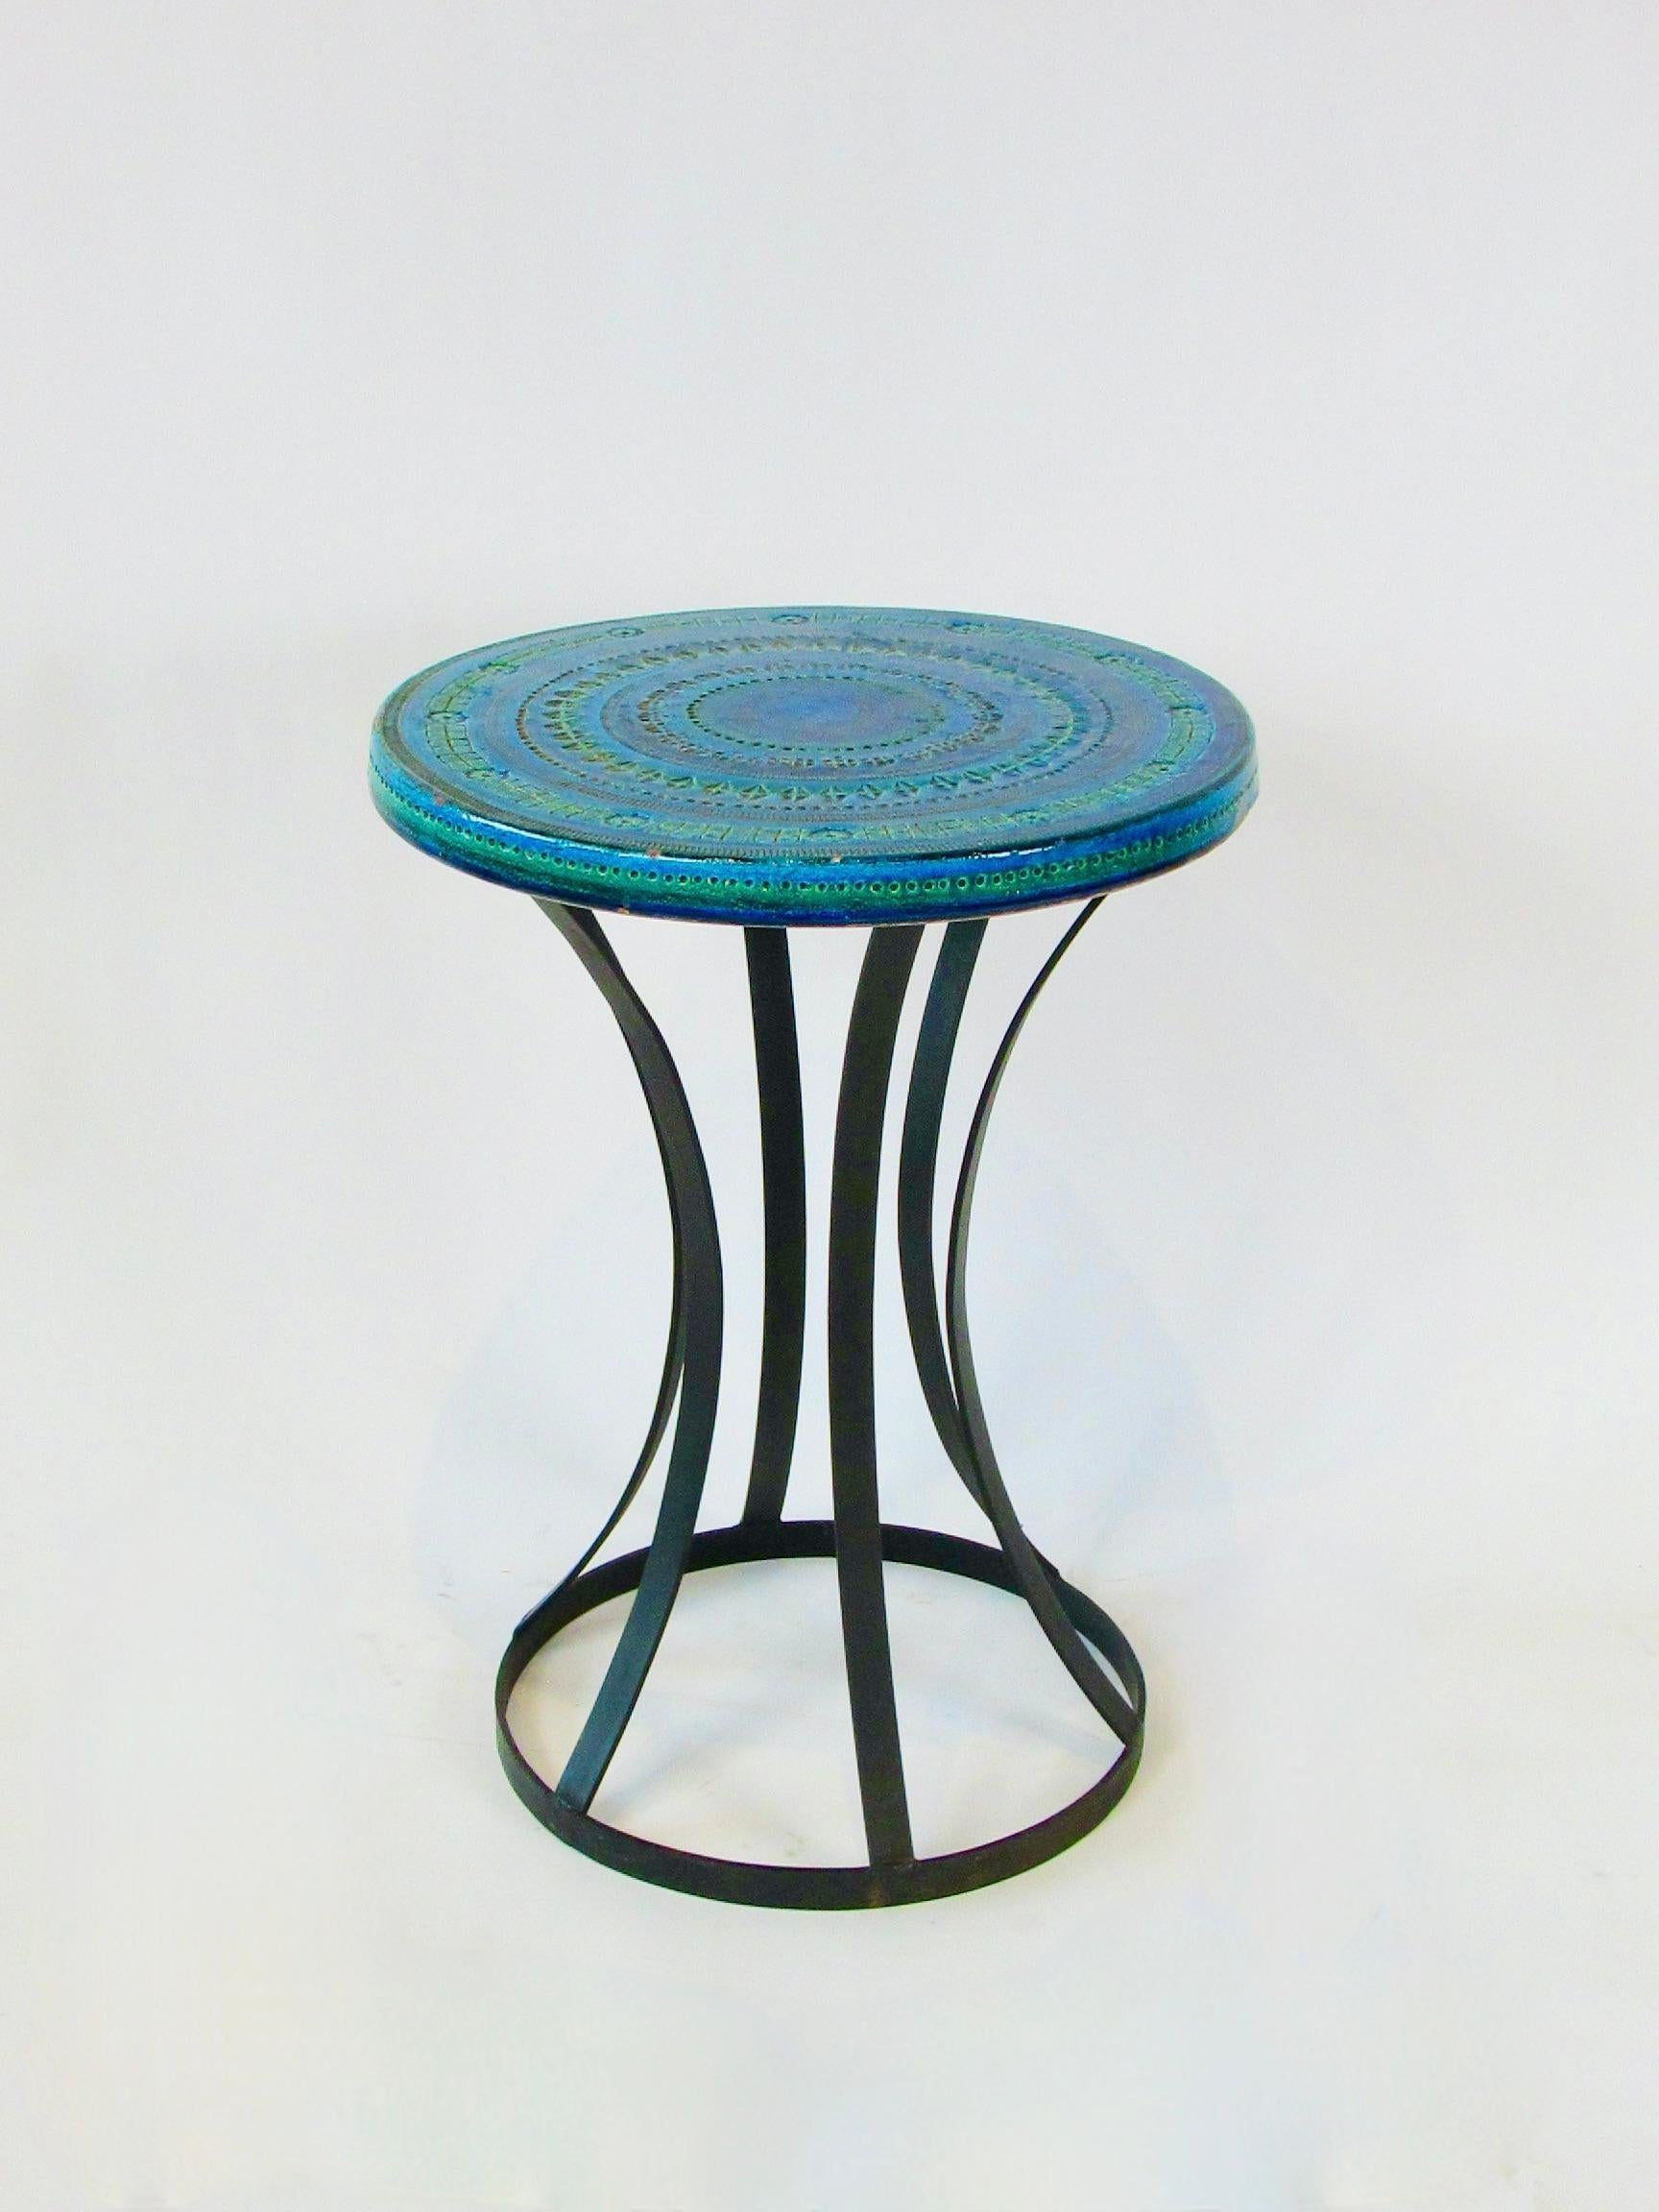 Blue Green Aldo Londi Bitossi for Raymor Pottery Table Top on Wrought Base For Sale 1